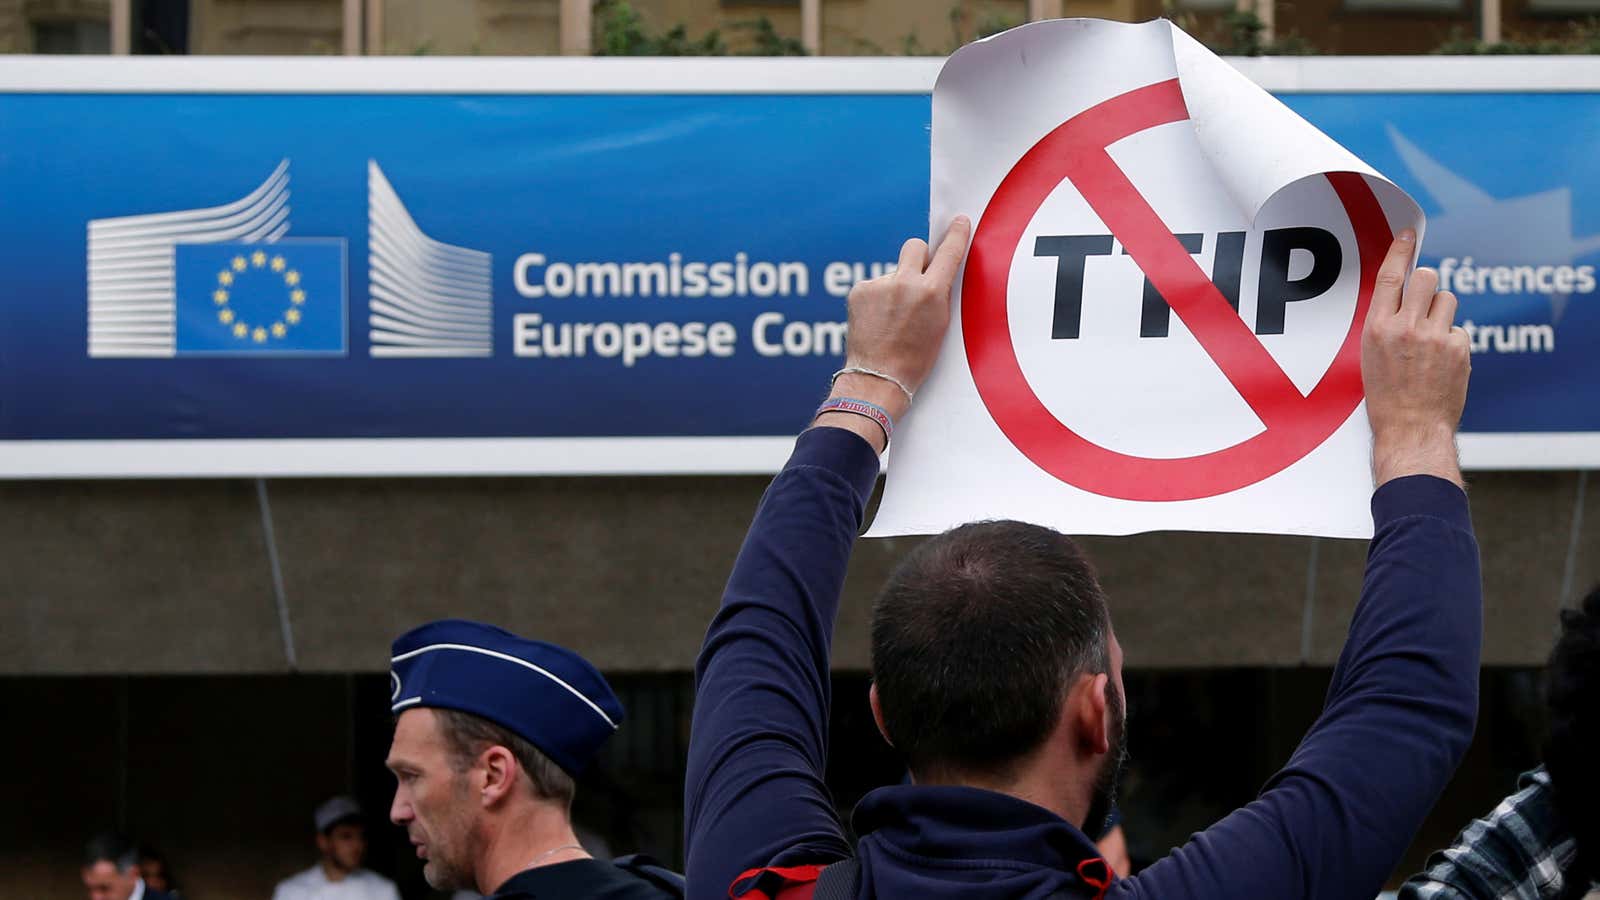 Protests against TTIP were held in Brussels in July.